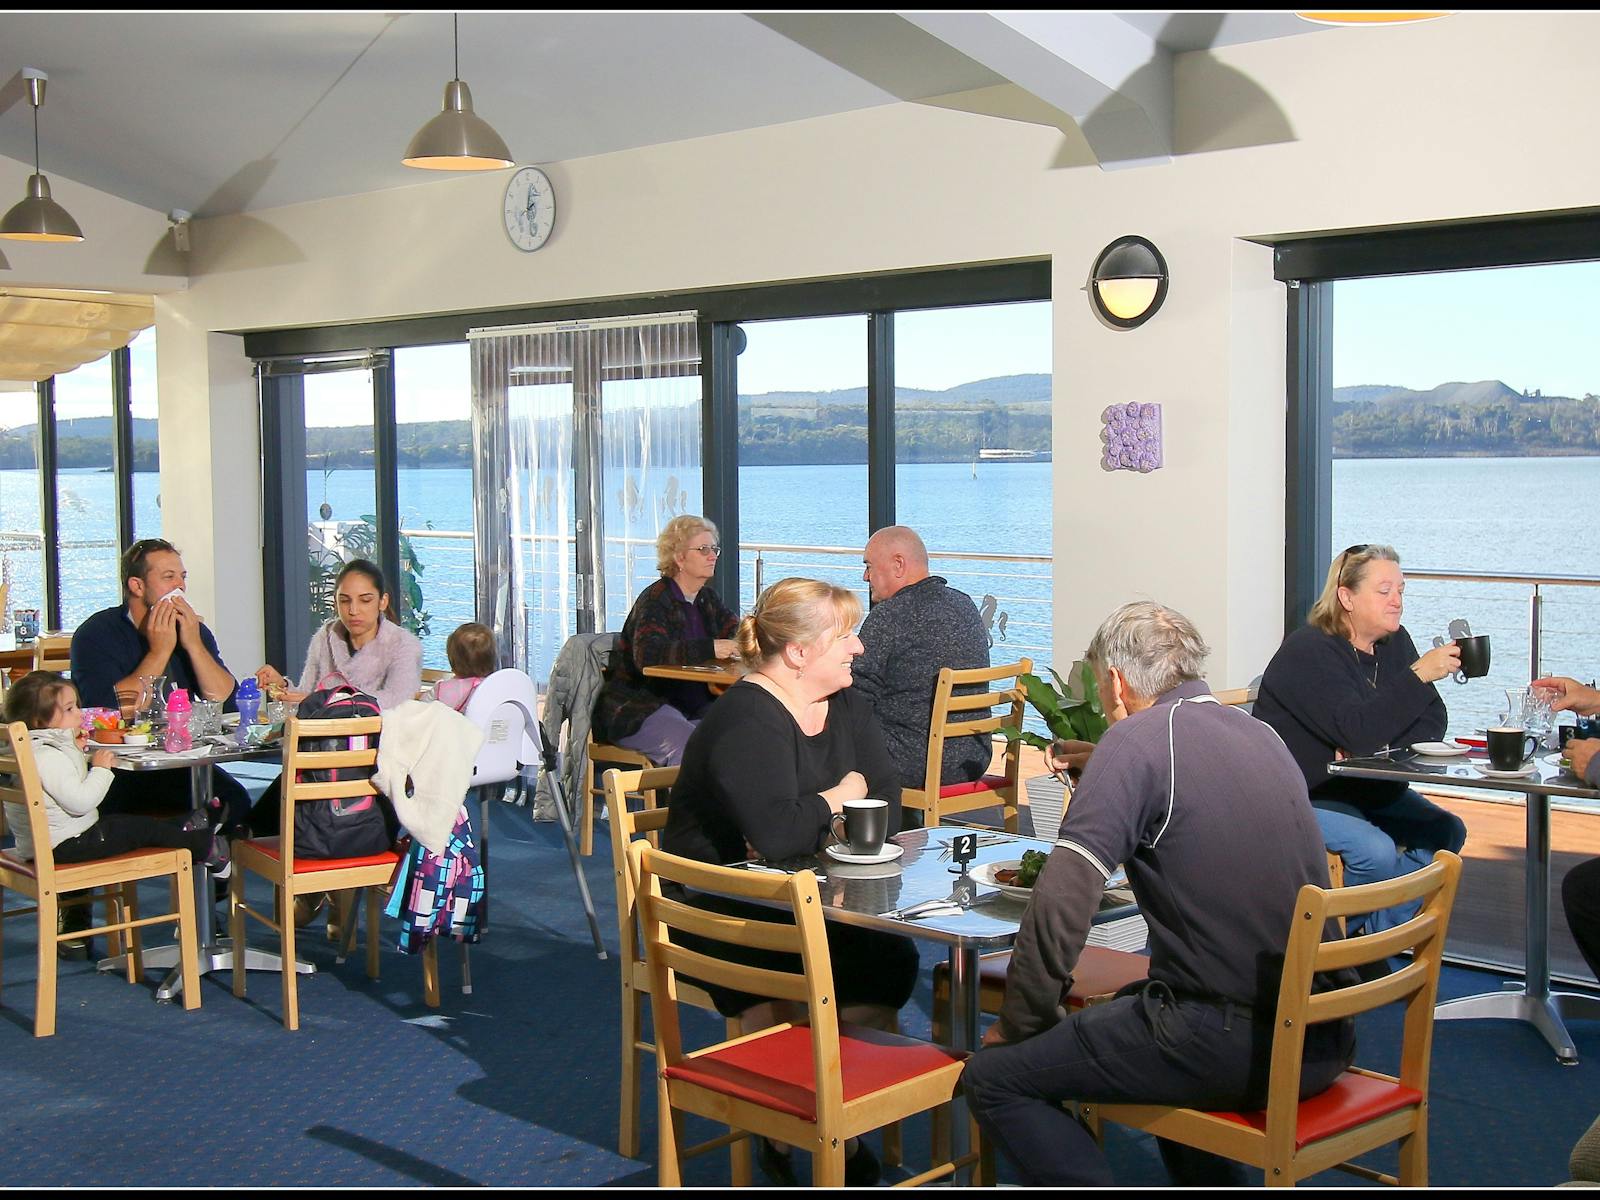 Dining at The Cormorant - Cafe on the Pier